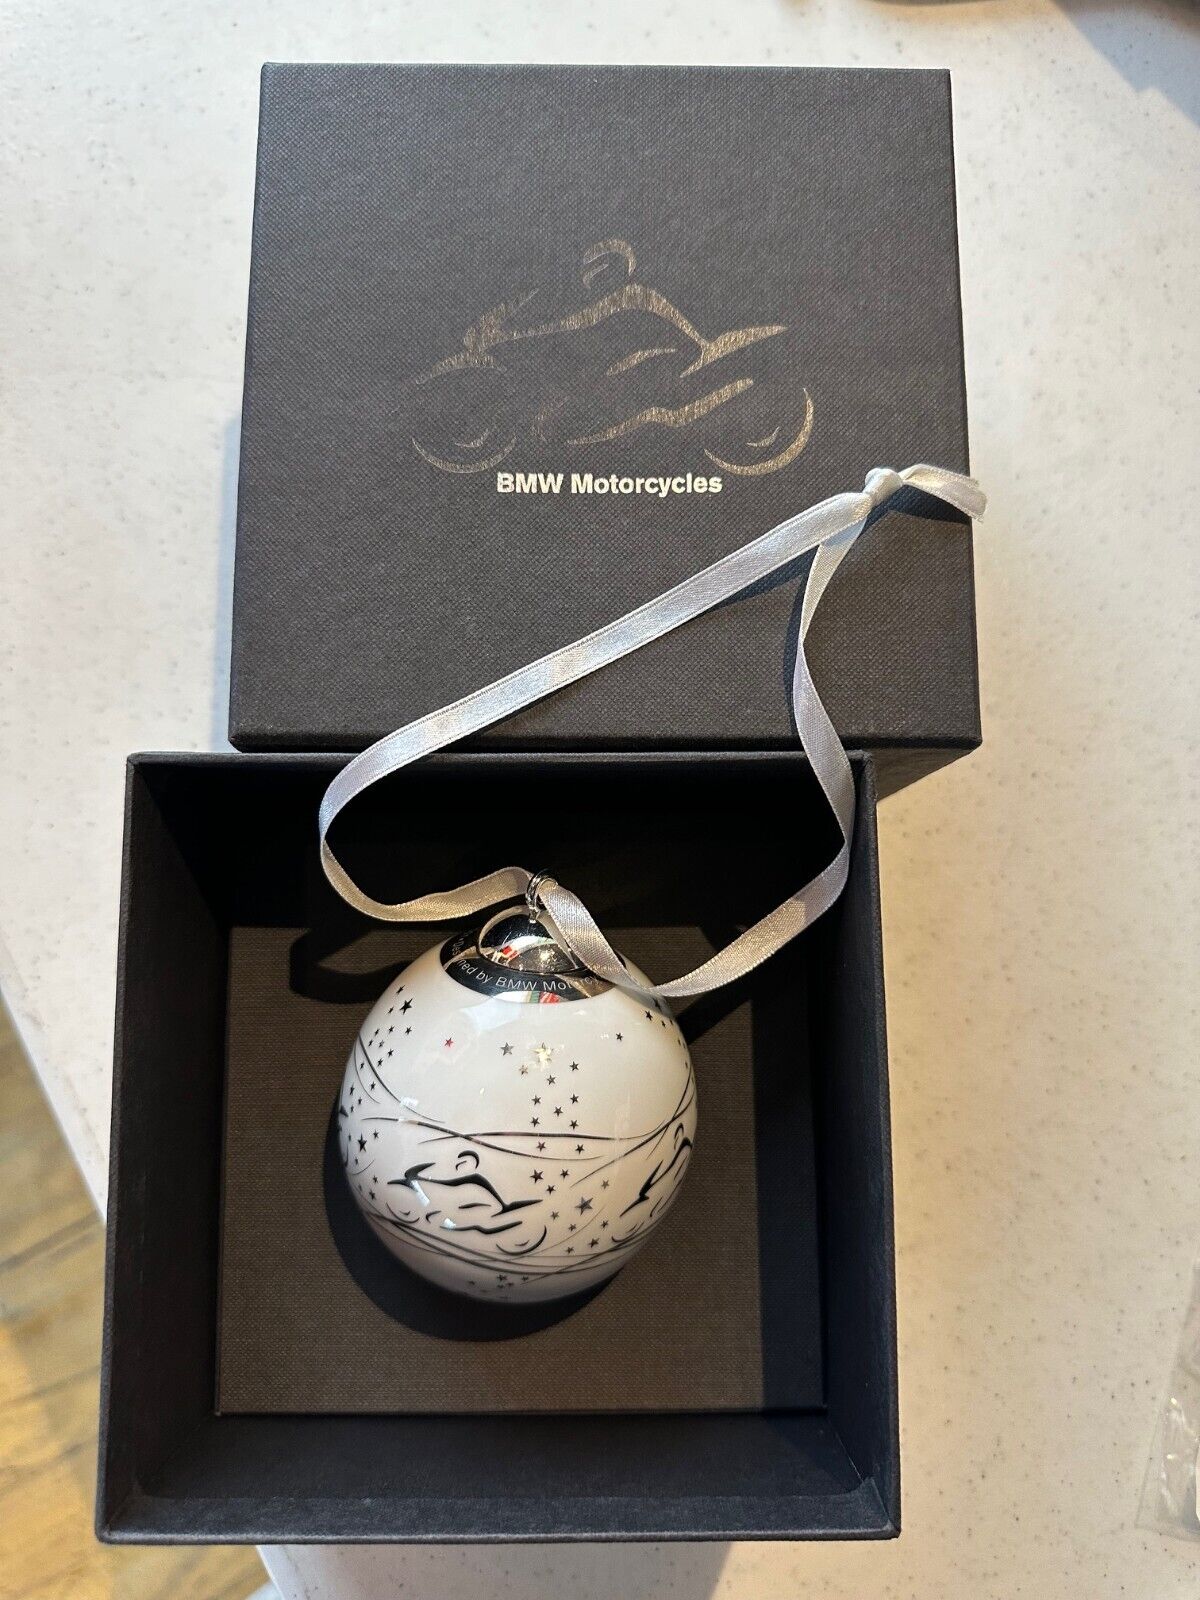 2001 BMW Motorcycles Collectors Edition Holiday Ornament Produced by Rosenthal